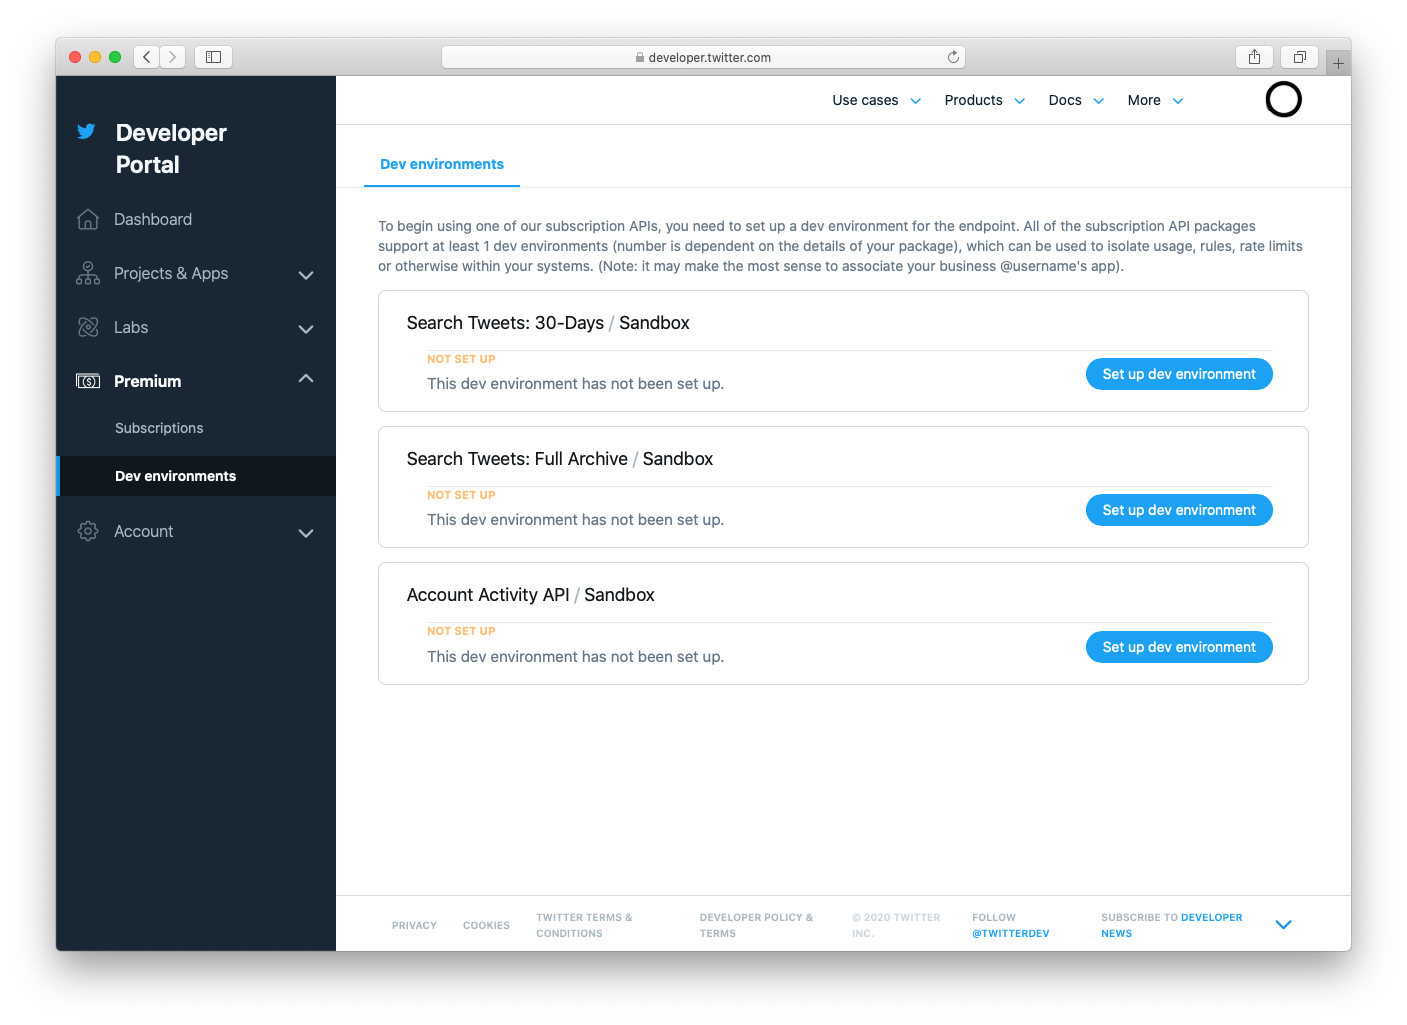 Navigate to the Twitter Dev Environment 